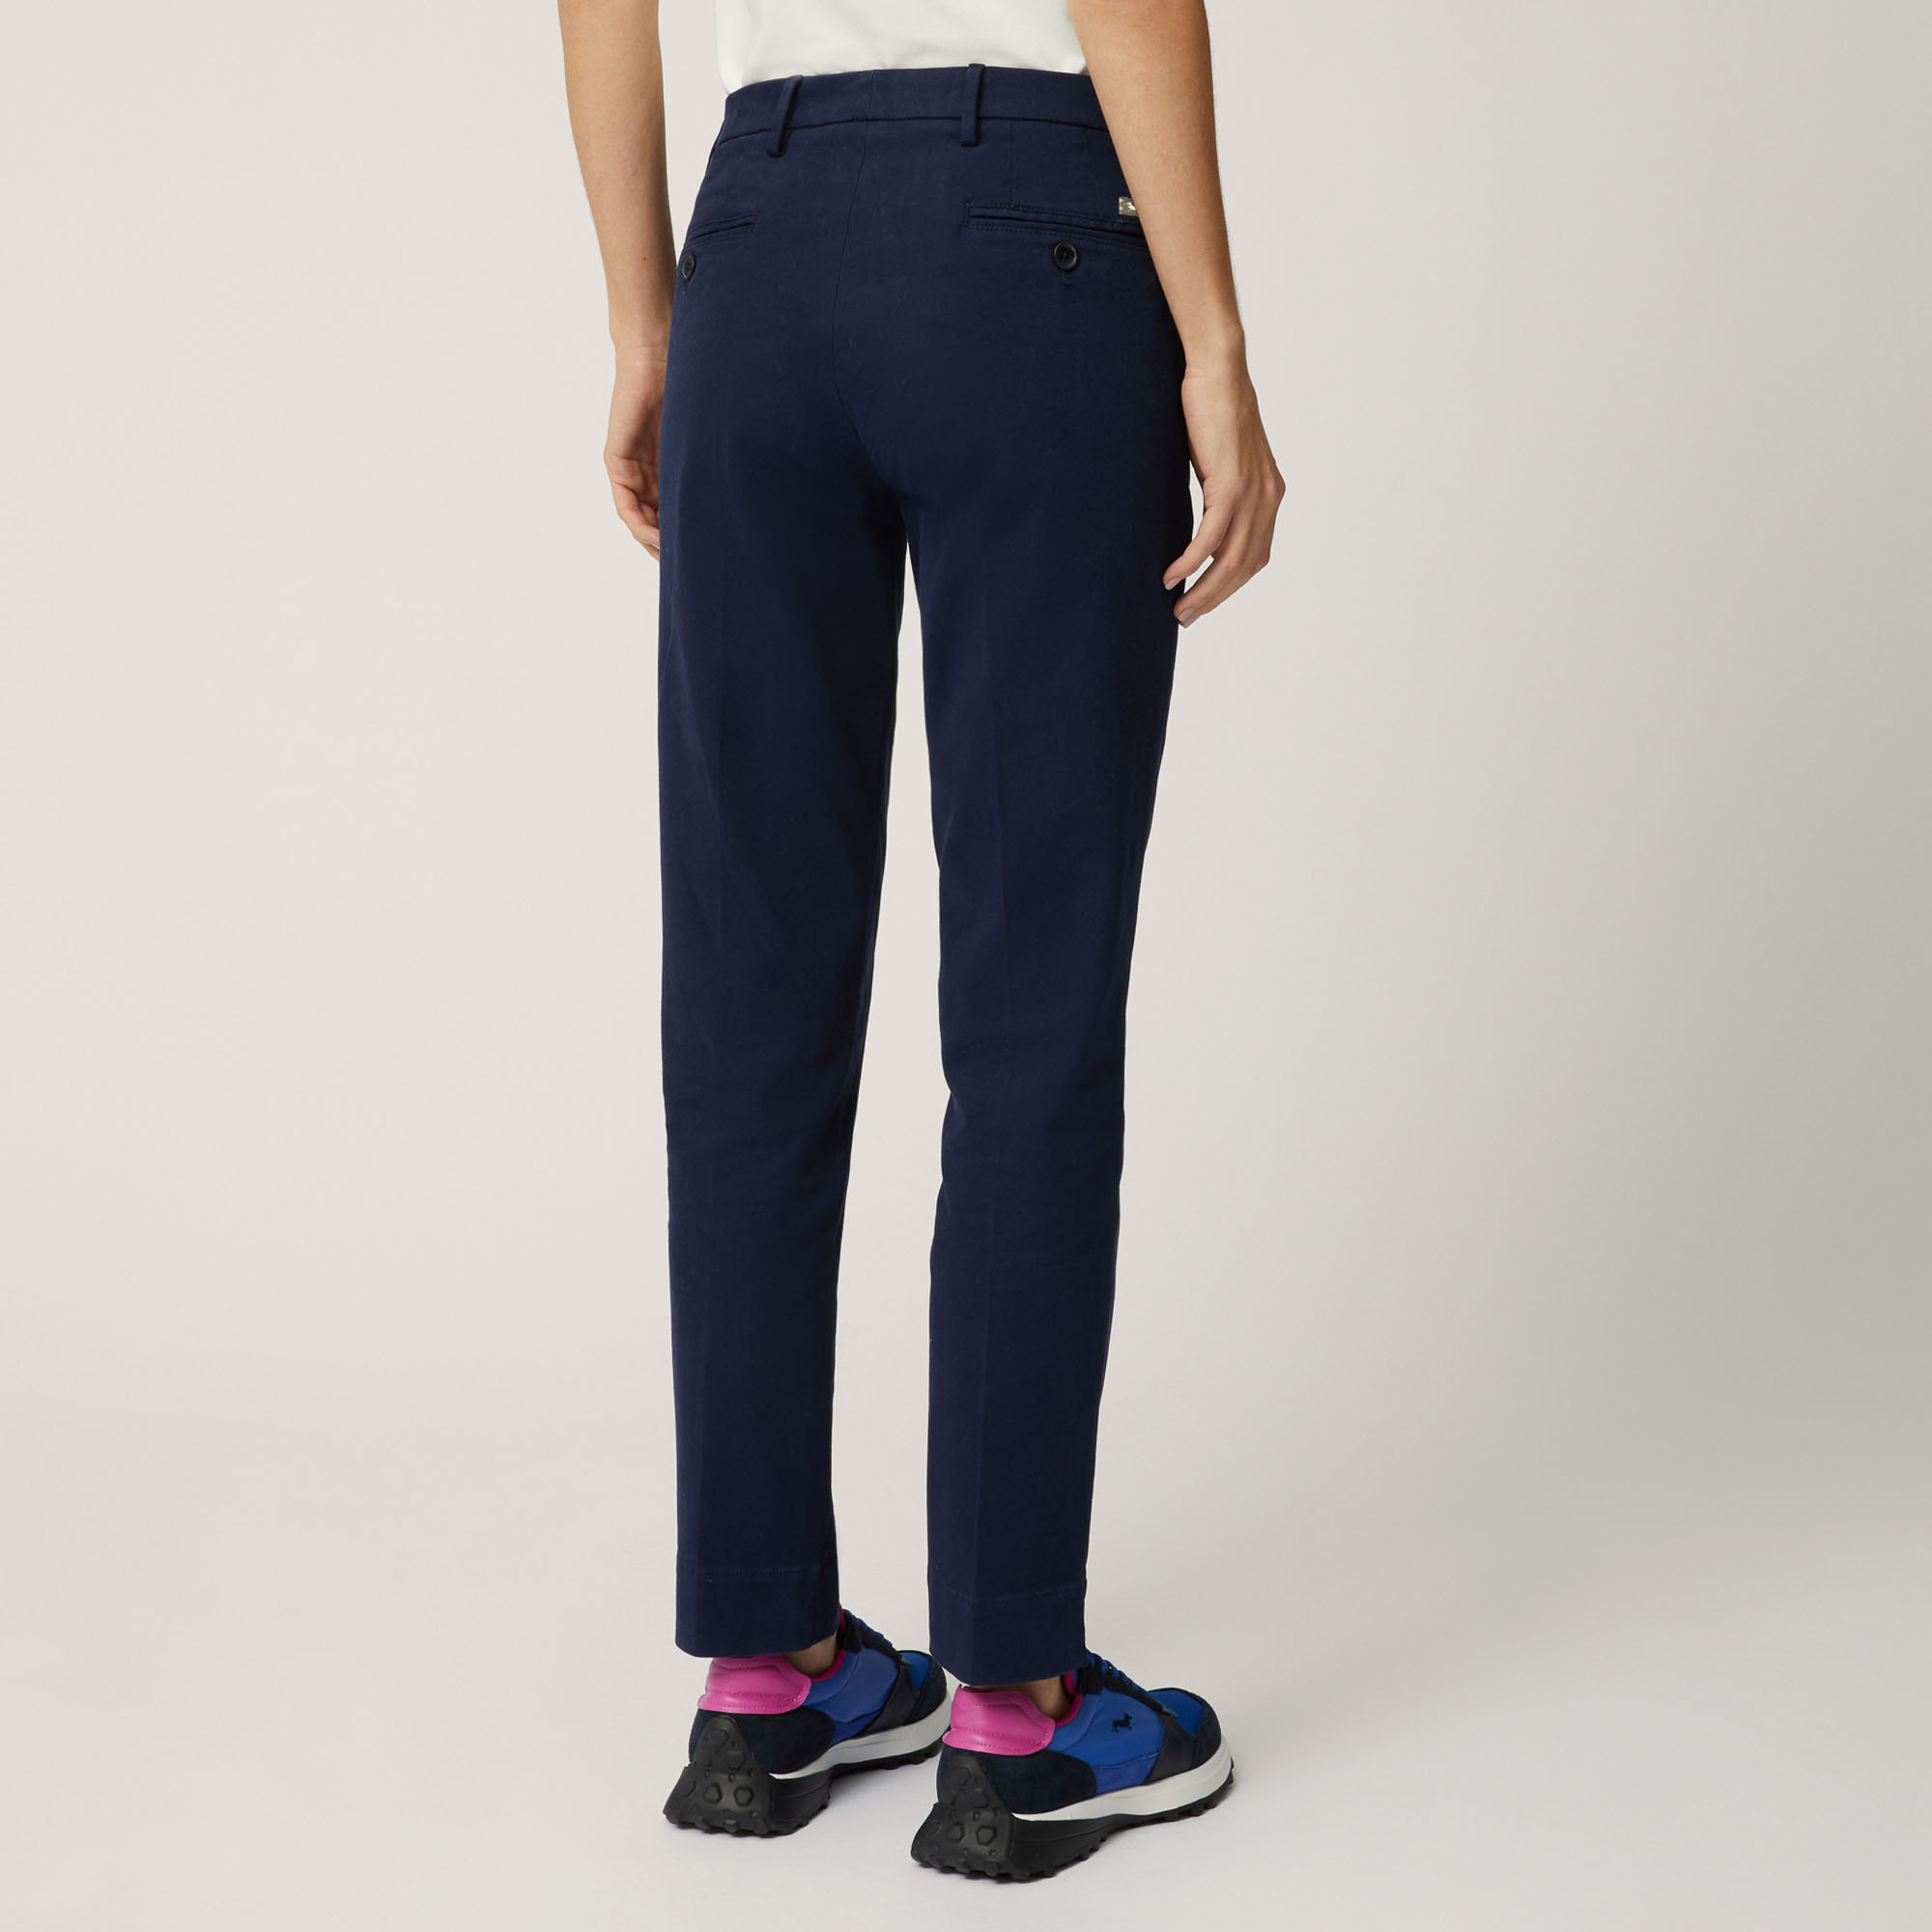 Pantalone Chino In Cotone Stretch, Blu Navy, large image number 1